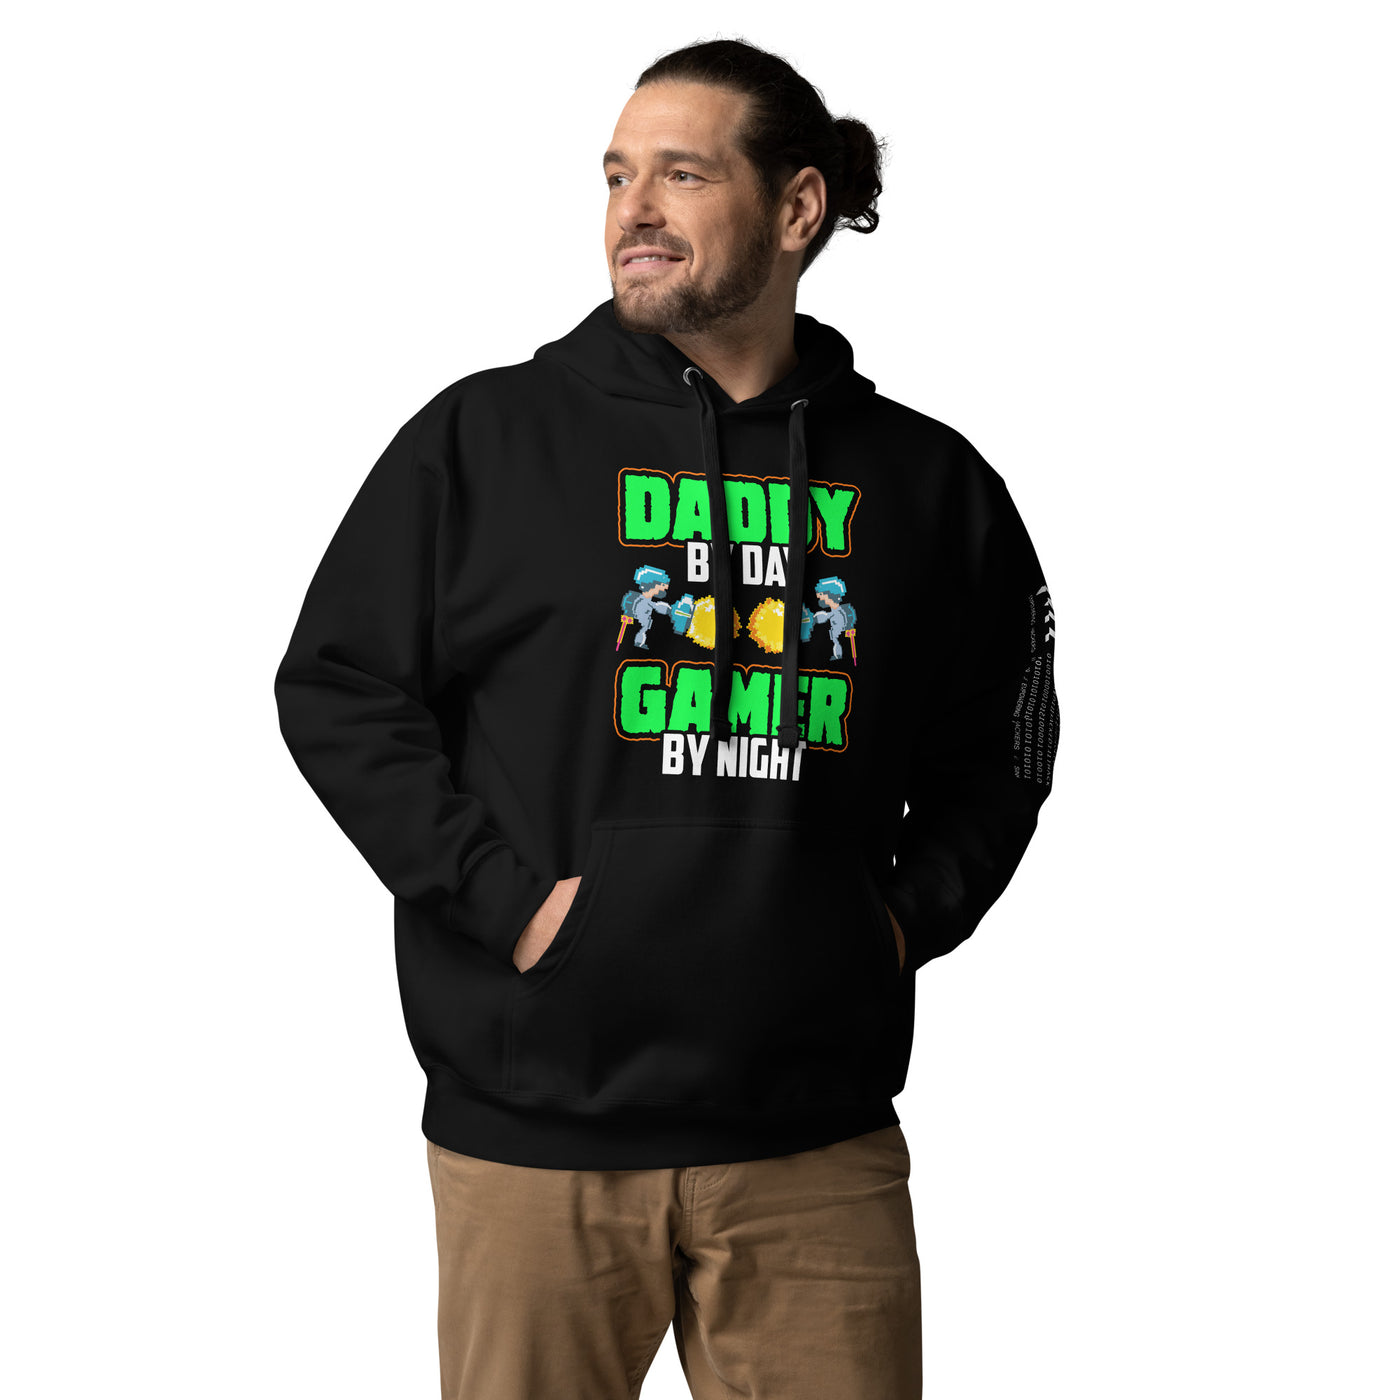 Daddy by Day, Gamer by Night Unisex Hoodie